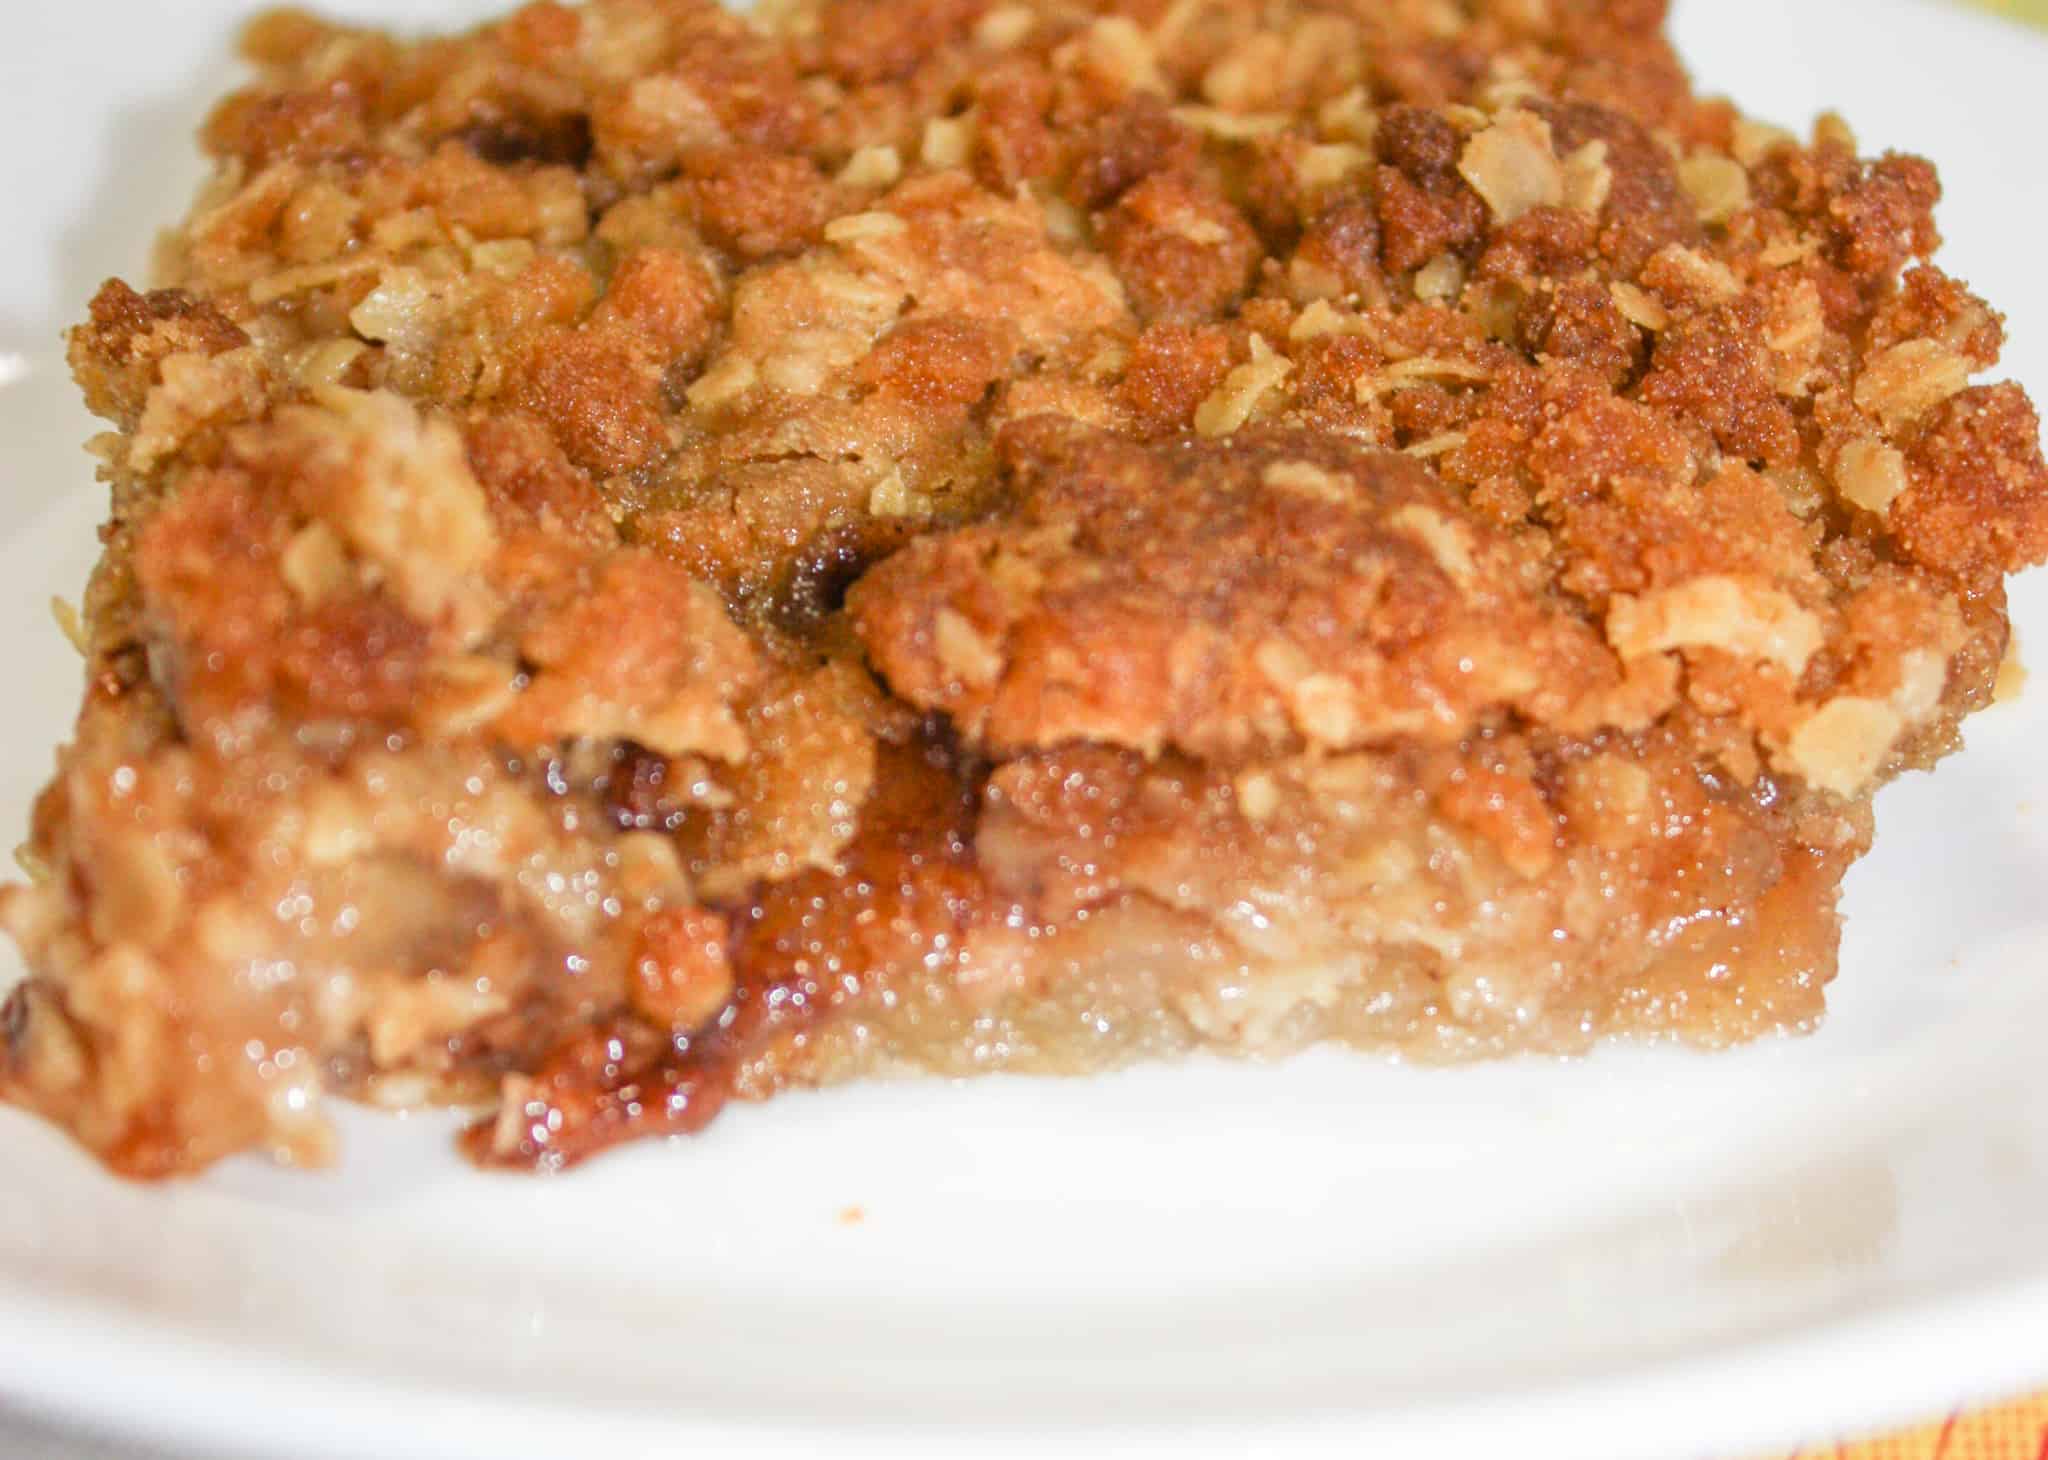 Apple Crisp is a classic fall dessert.  This gluten free version will not disappoint and will be enjoyed by all whether or not they need to avoid gluten.